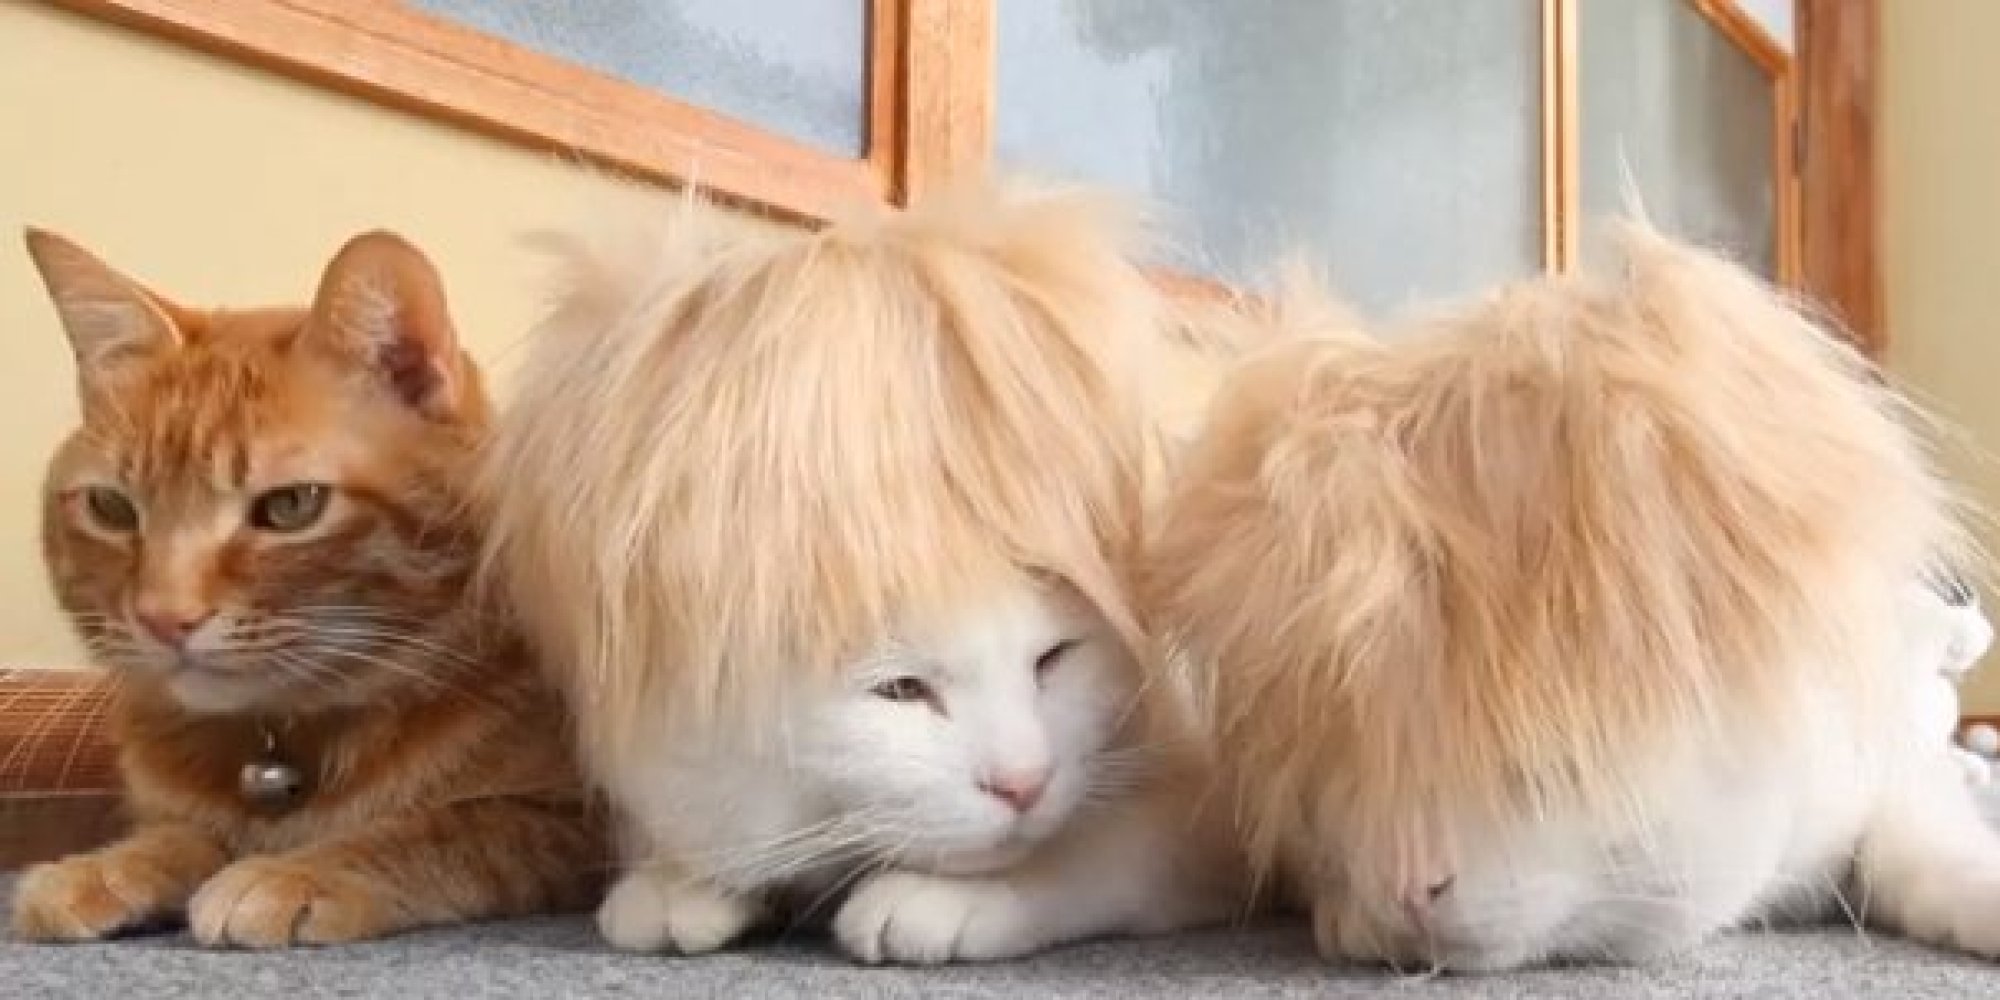 Just Zone Out On These Two Cats Wearing Puffy Wigs For A While ...